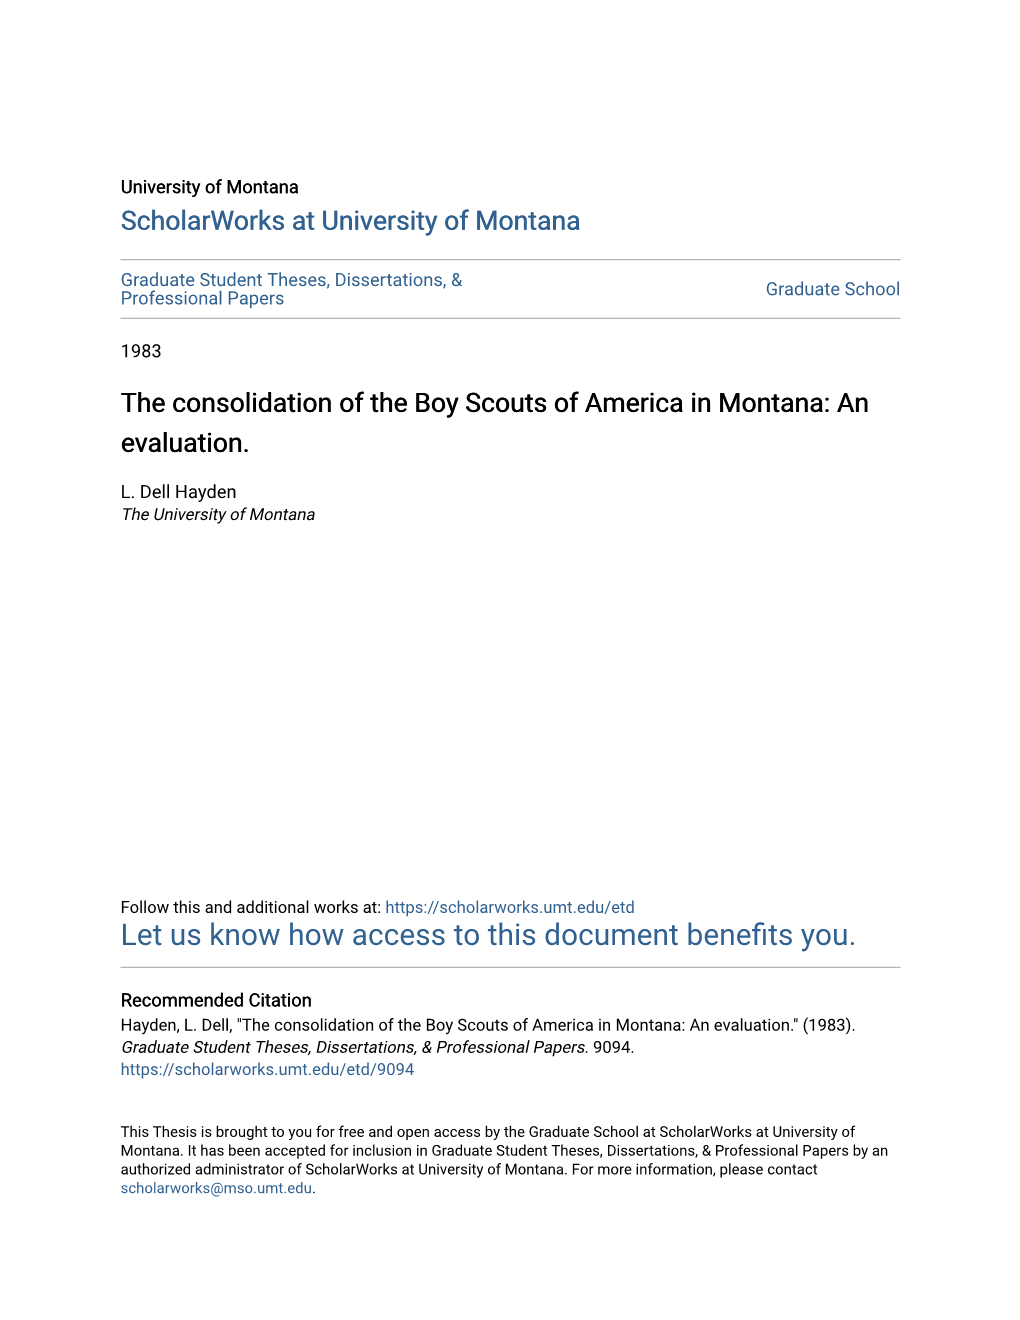 The Consolidation of the Boy Scouts of America in Montana: an Evaluation